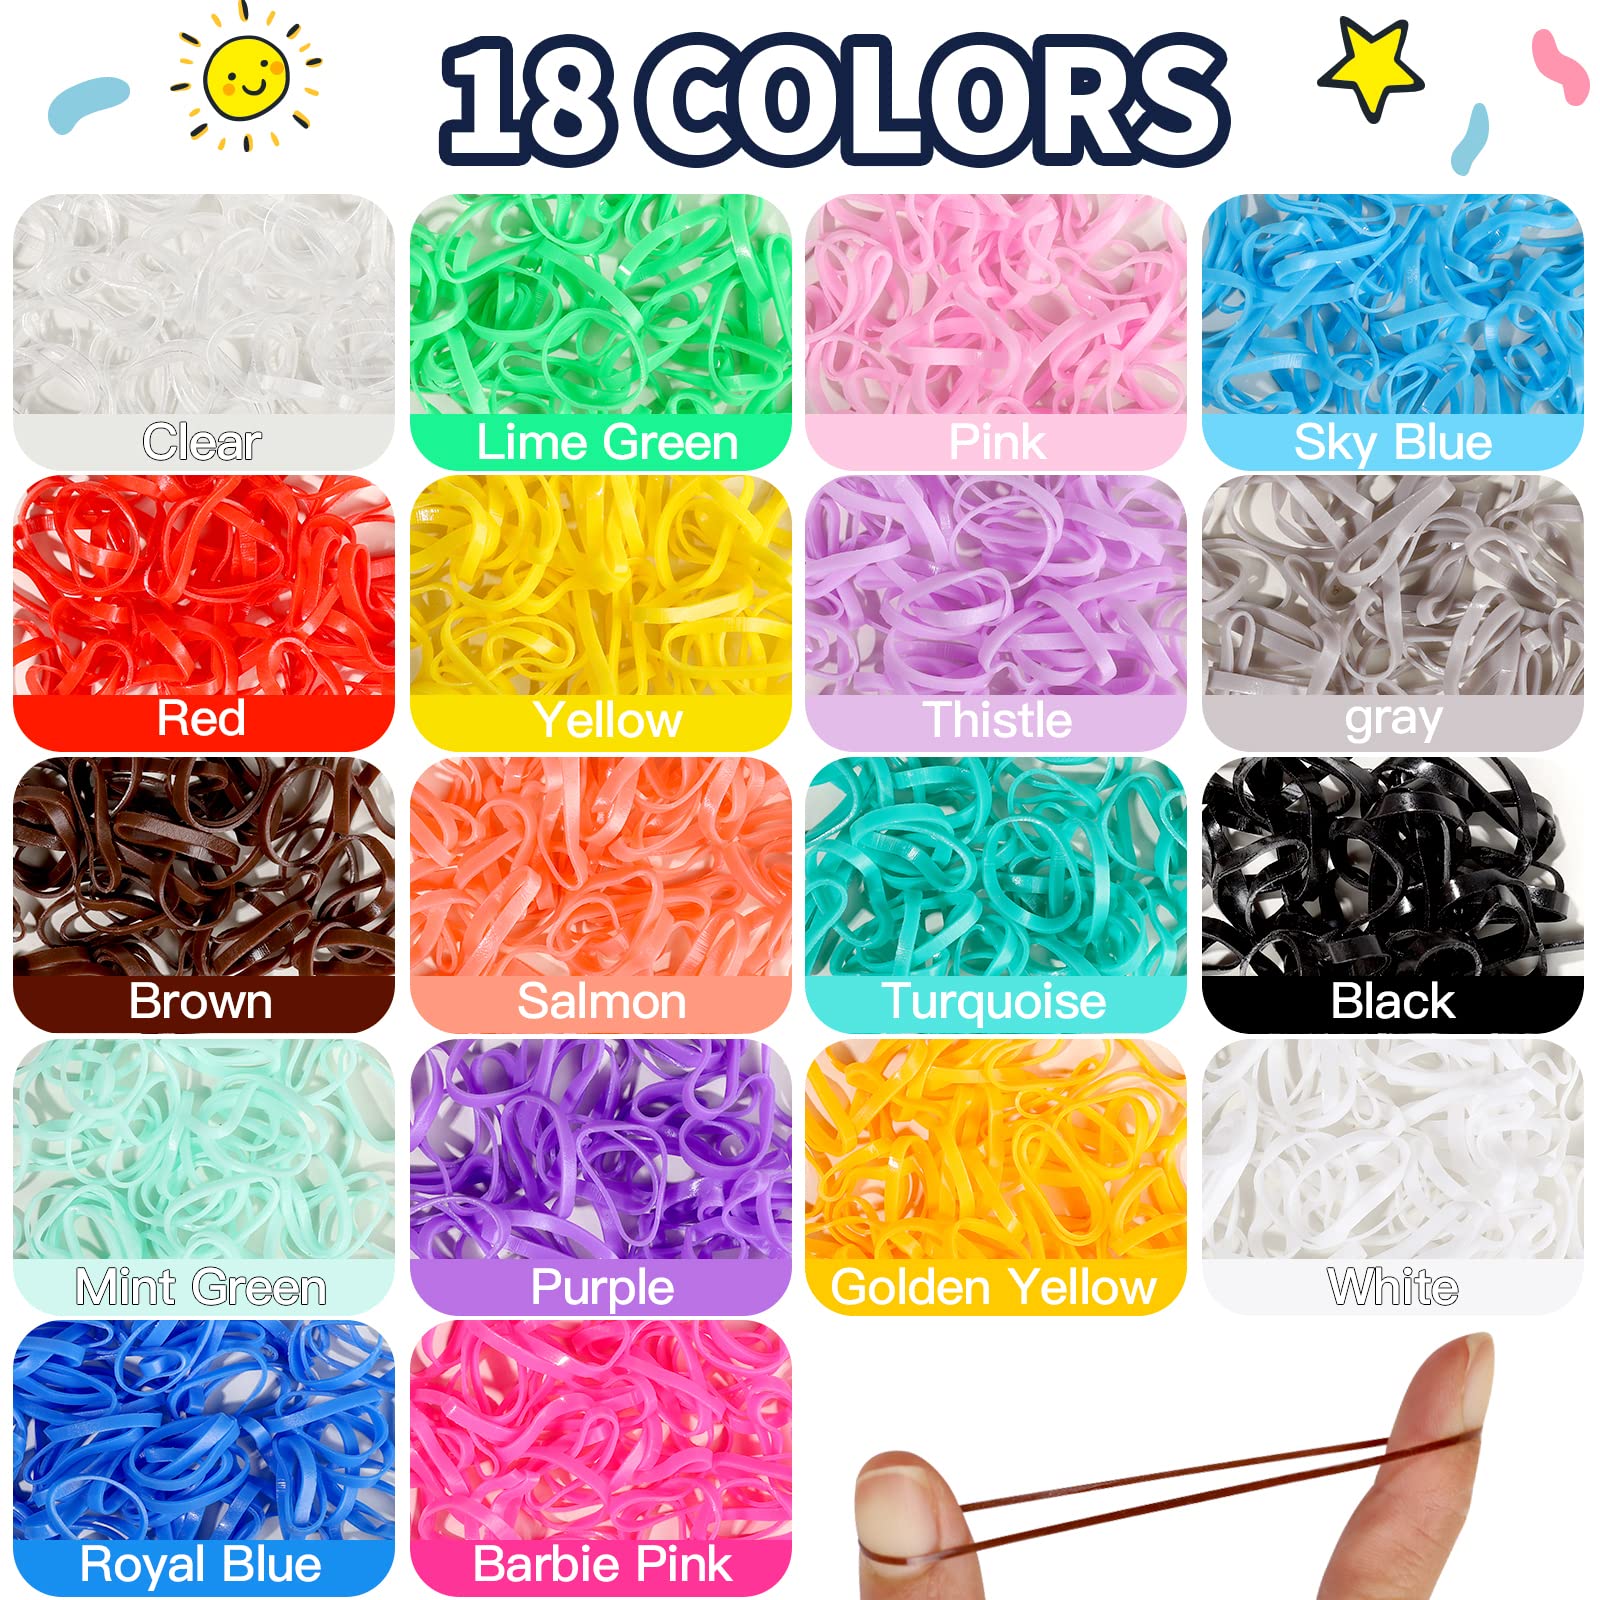 Elastic Hair Bands, YGDZ 1500pcs Hair Rubber Bands and 120pcs Baby Hair Ties with Organizer Box, Colorful Small Hair Tie Set with Hair Tail Tools, Rat Tail Comb, Hair Accessories for Girl, Toddler